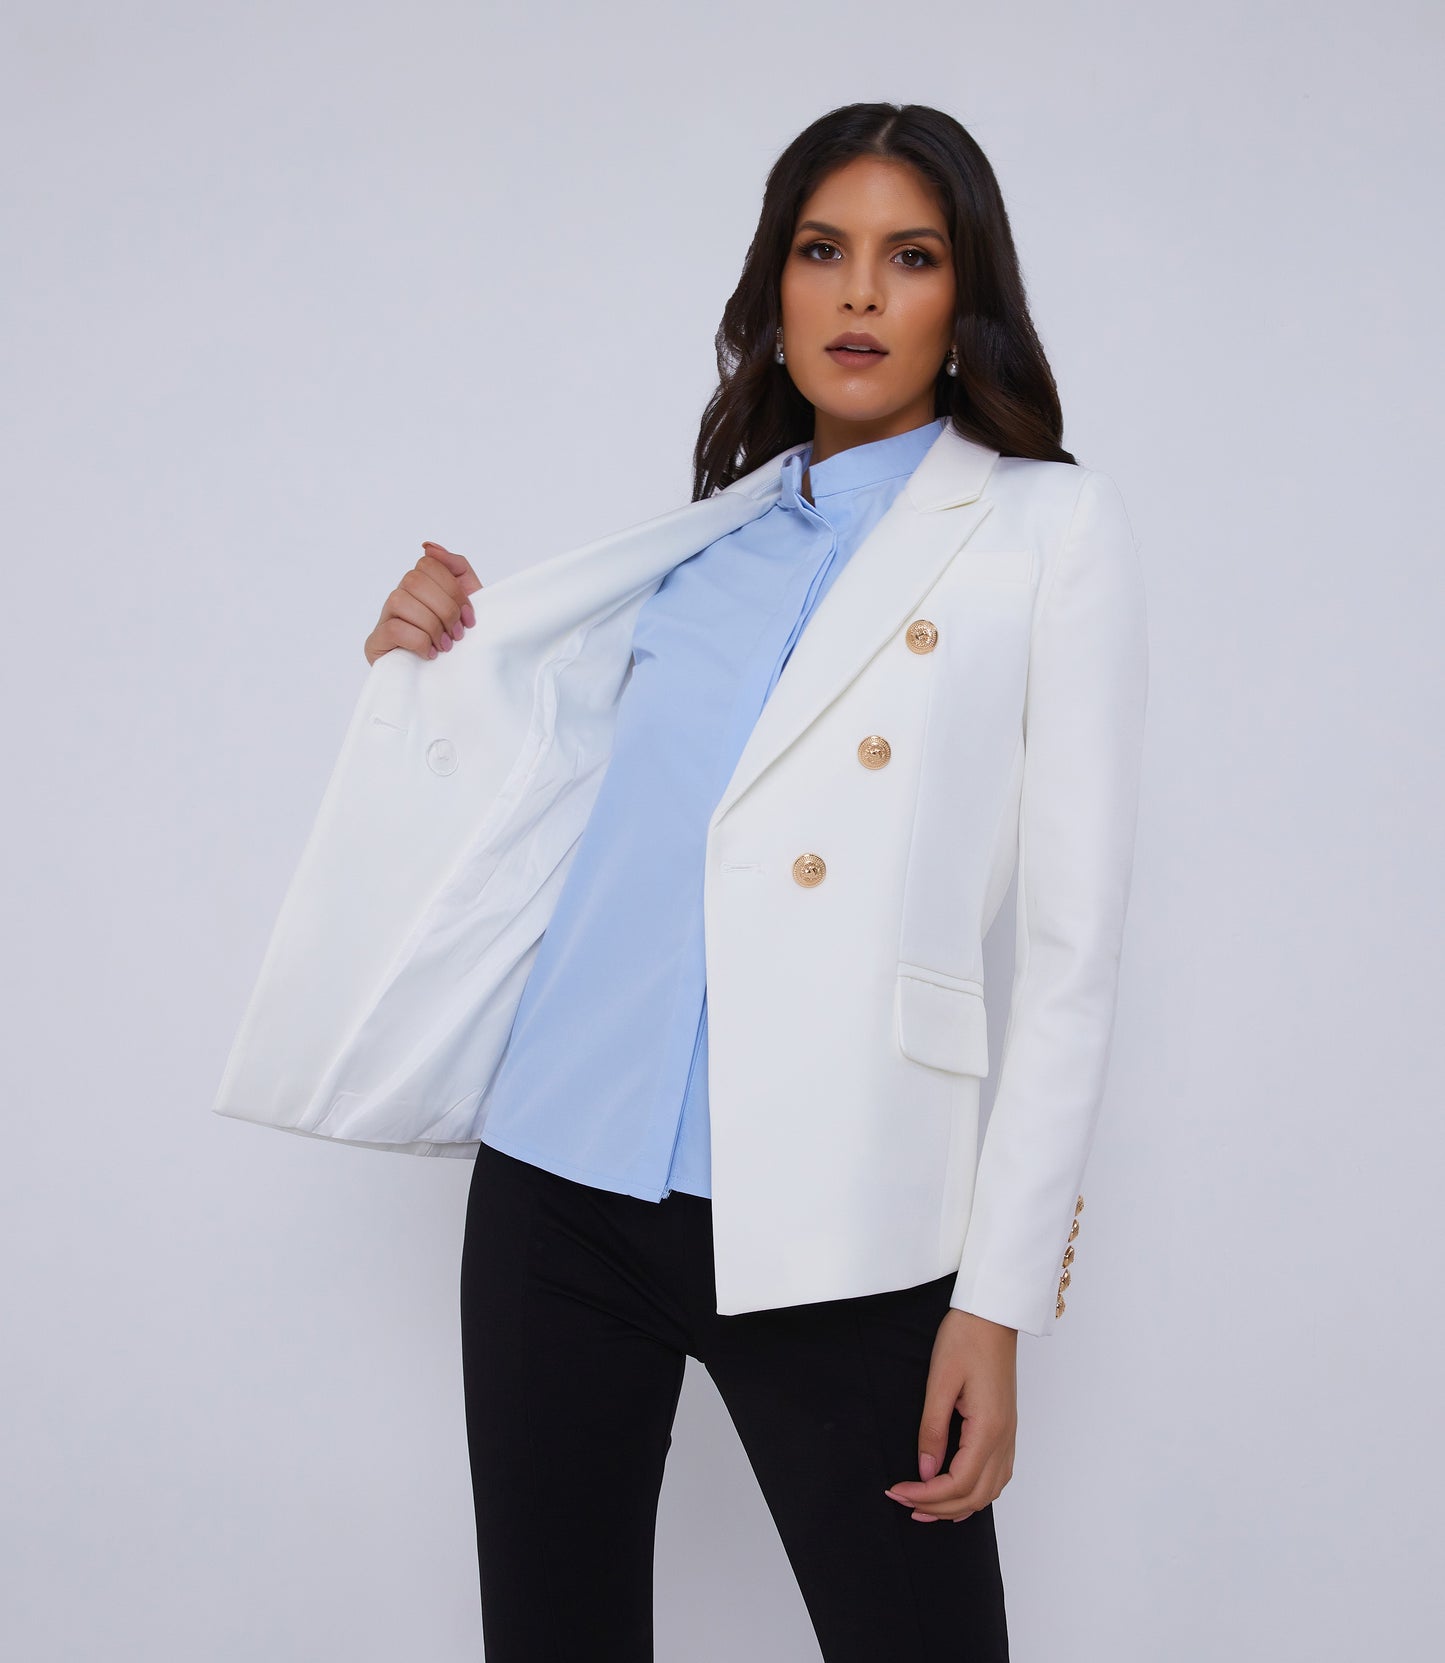 Women's White Double Breasted Blazer Gold Buttons UK